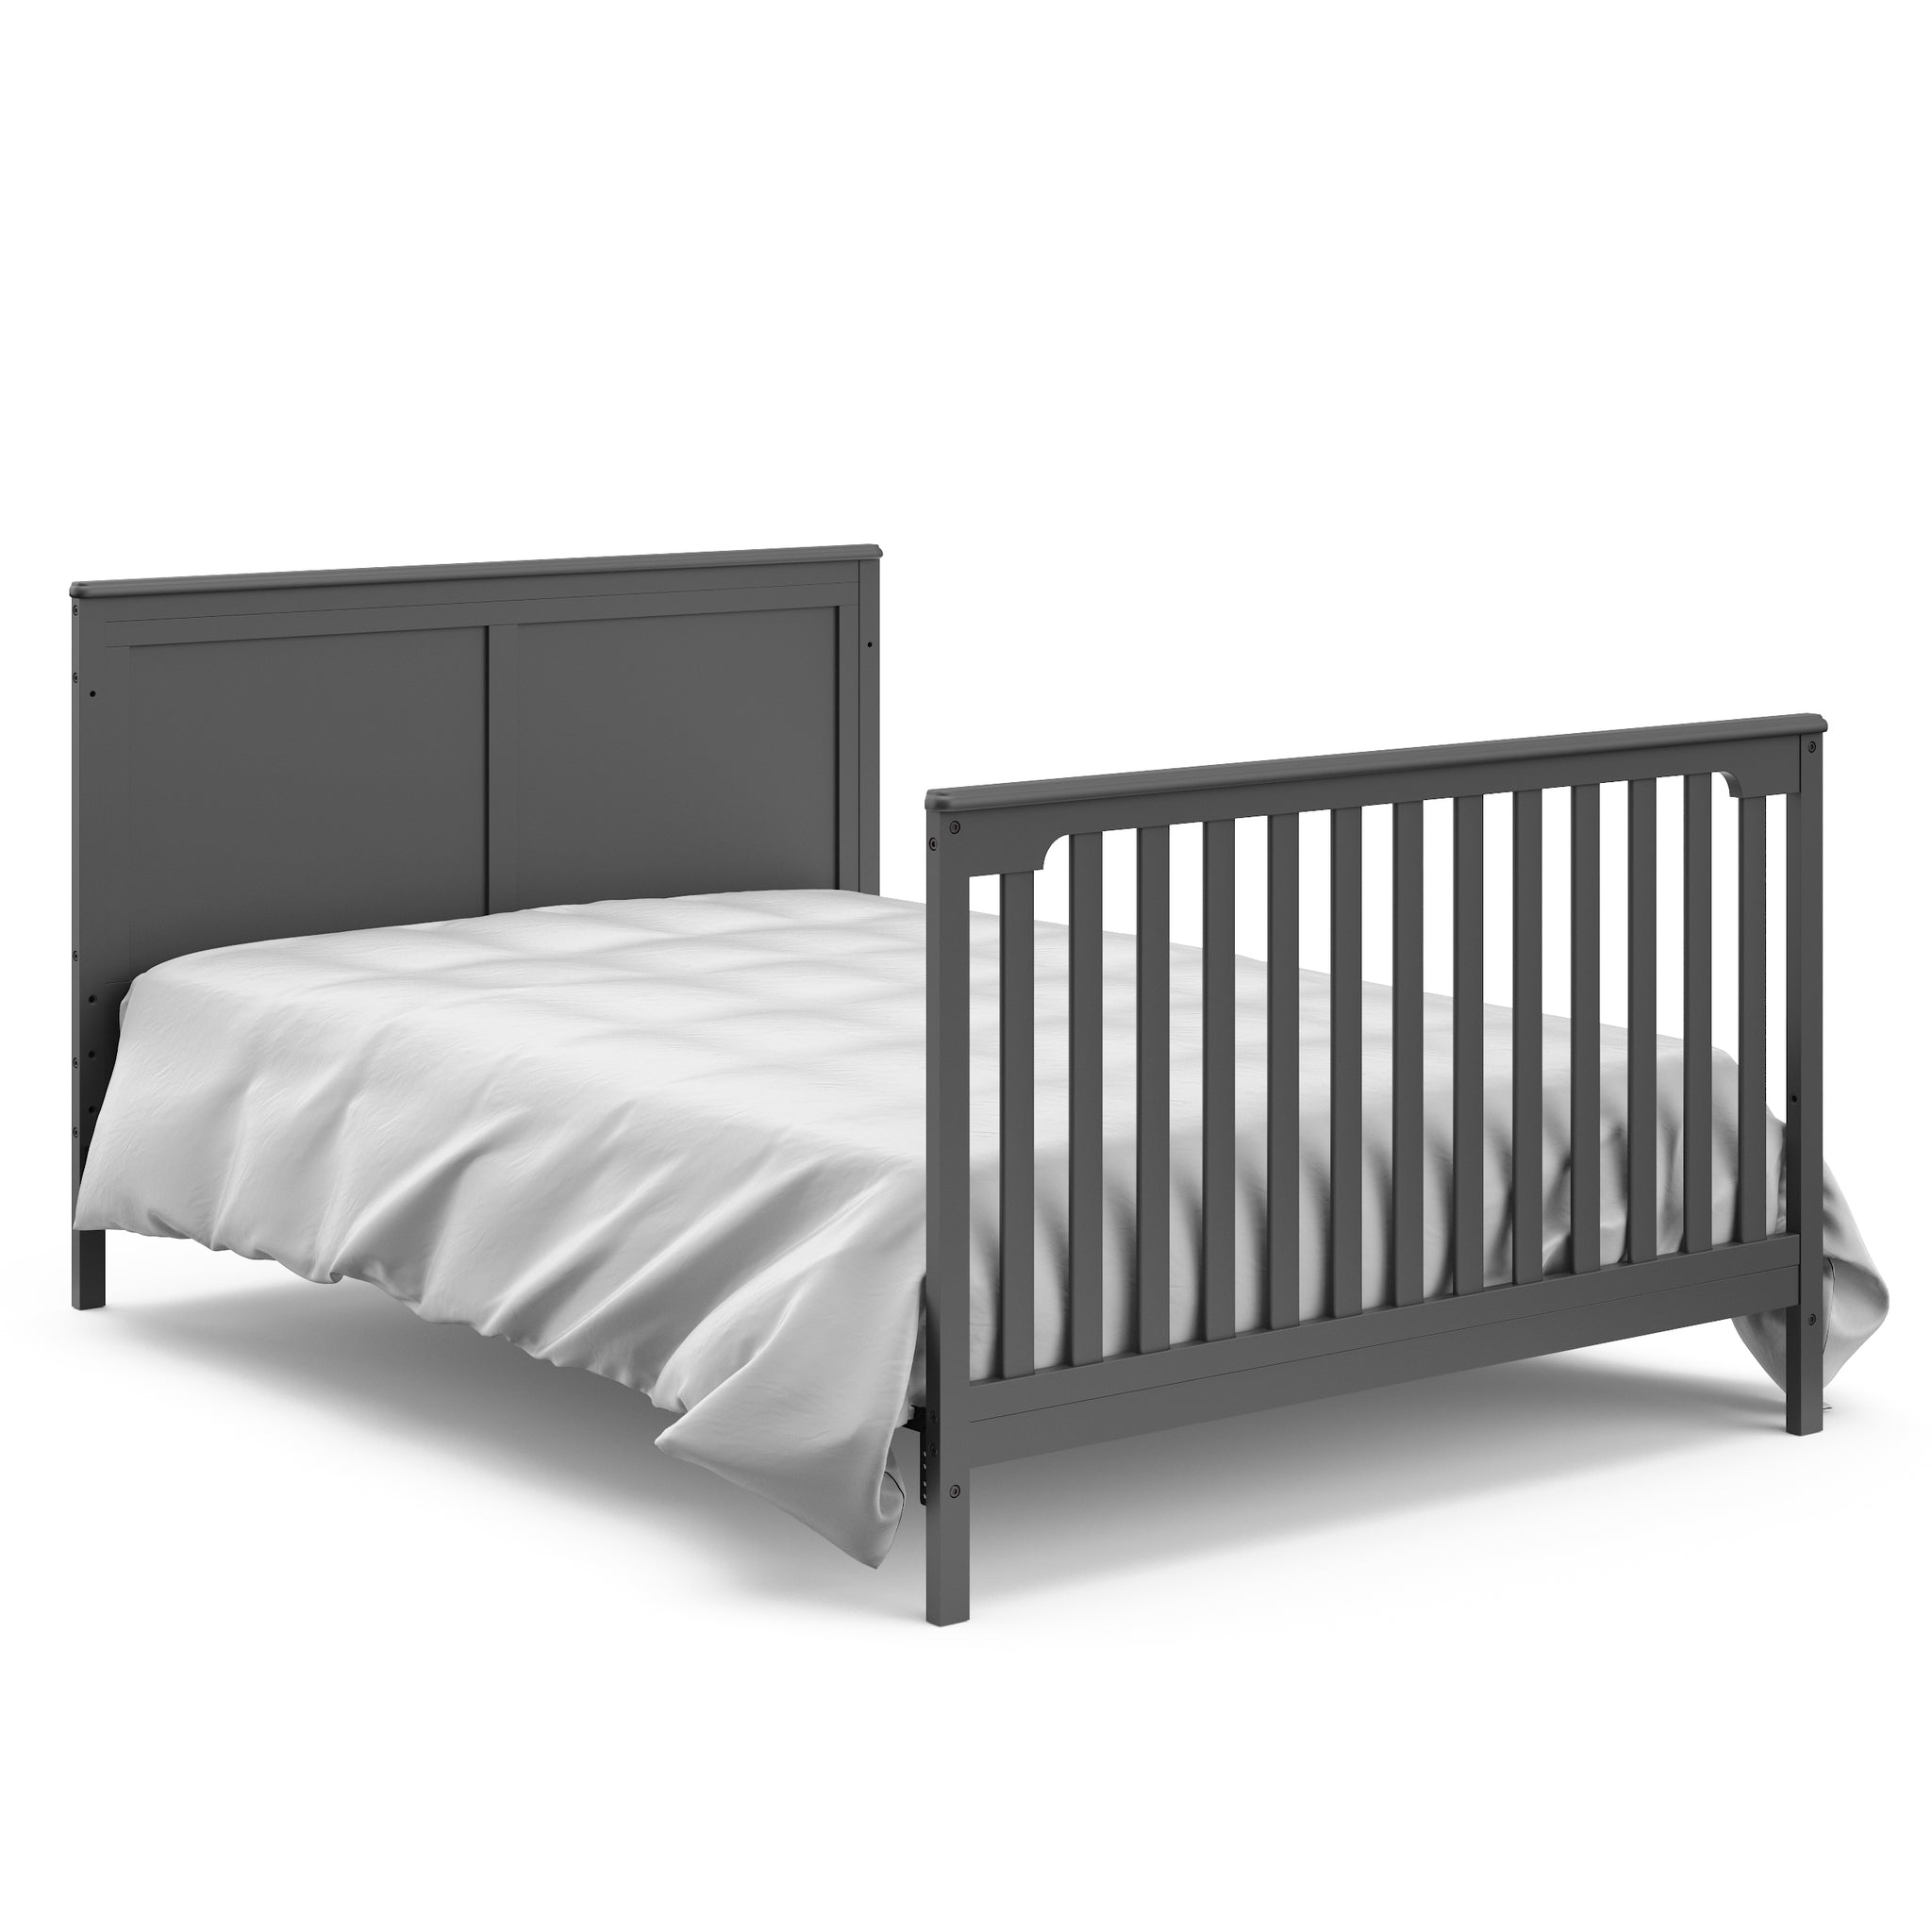 gray crib in full-size bed with headboard and footboard conversion